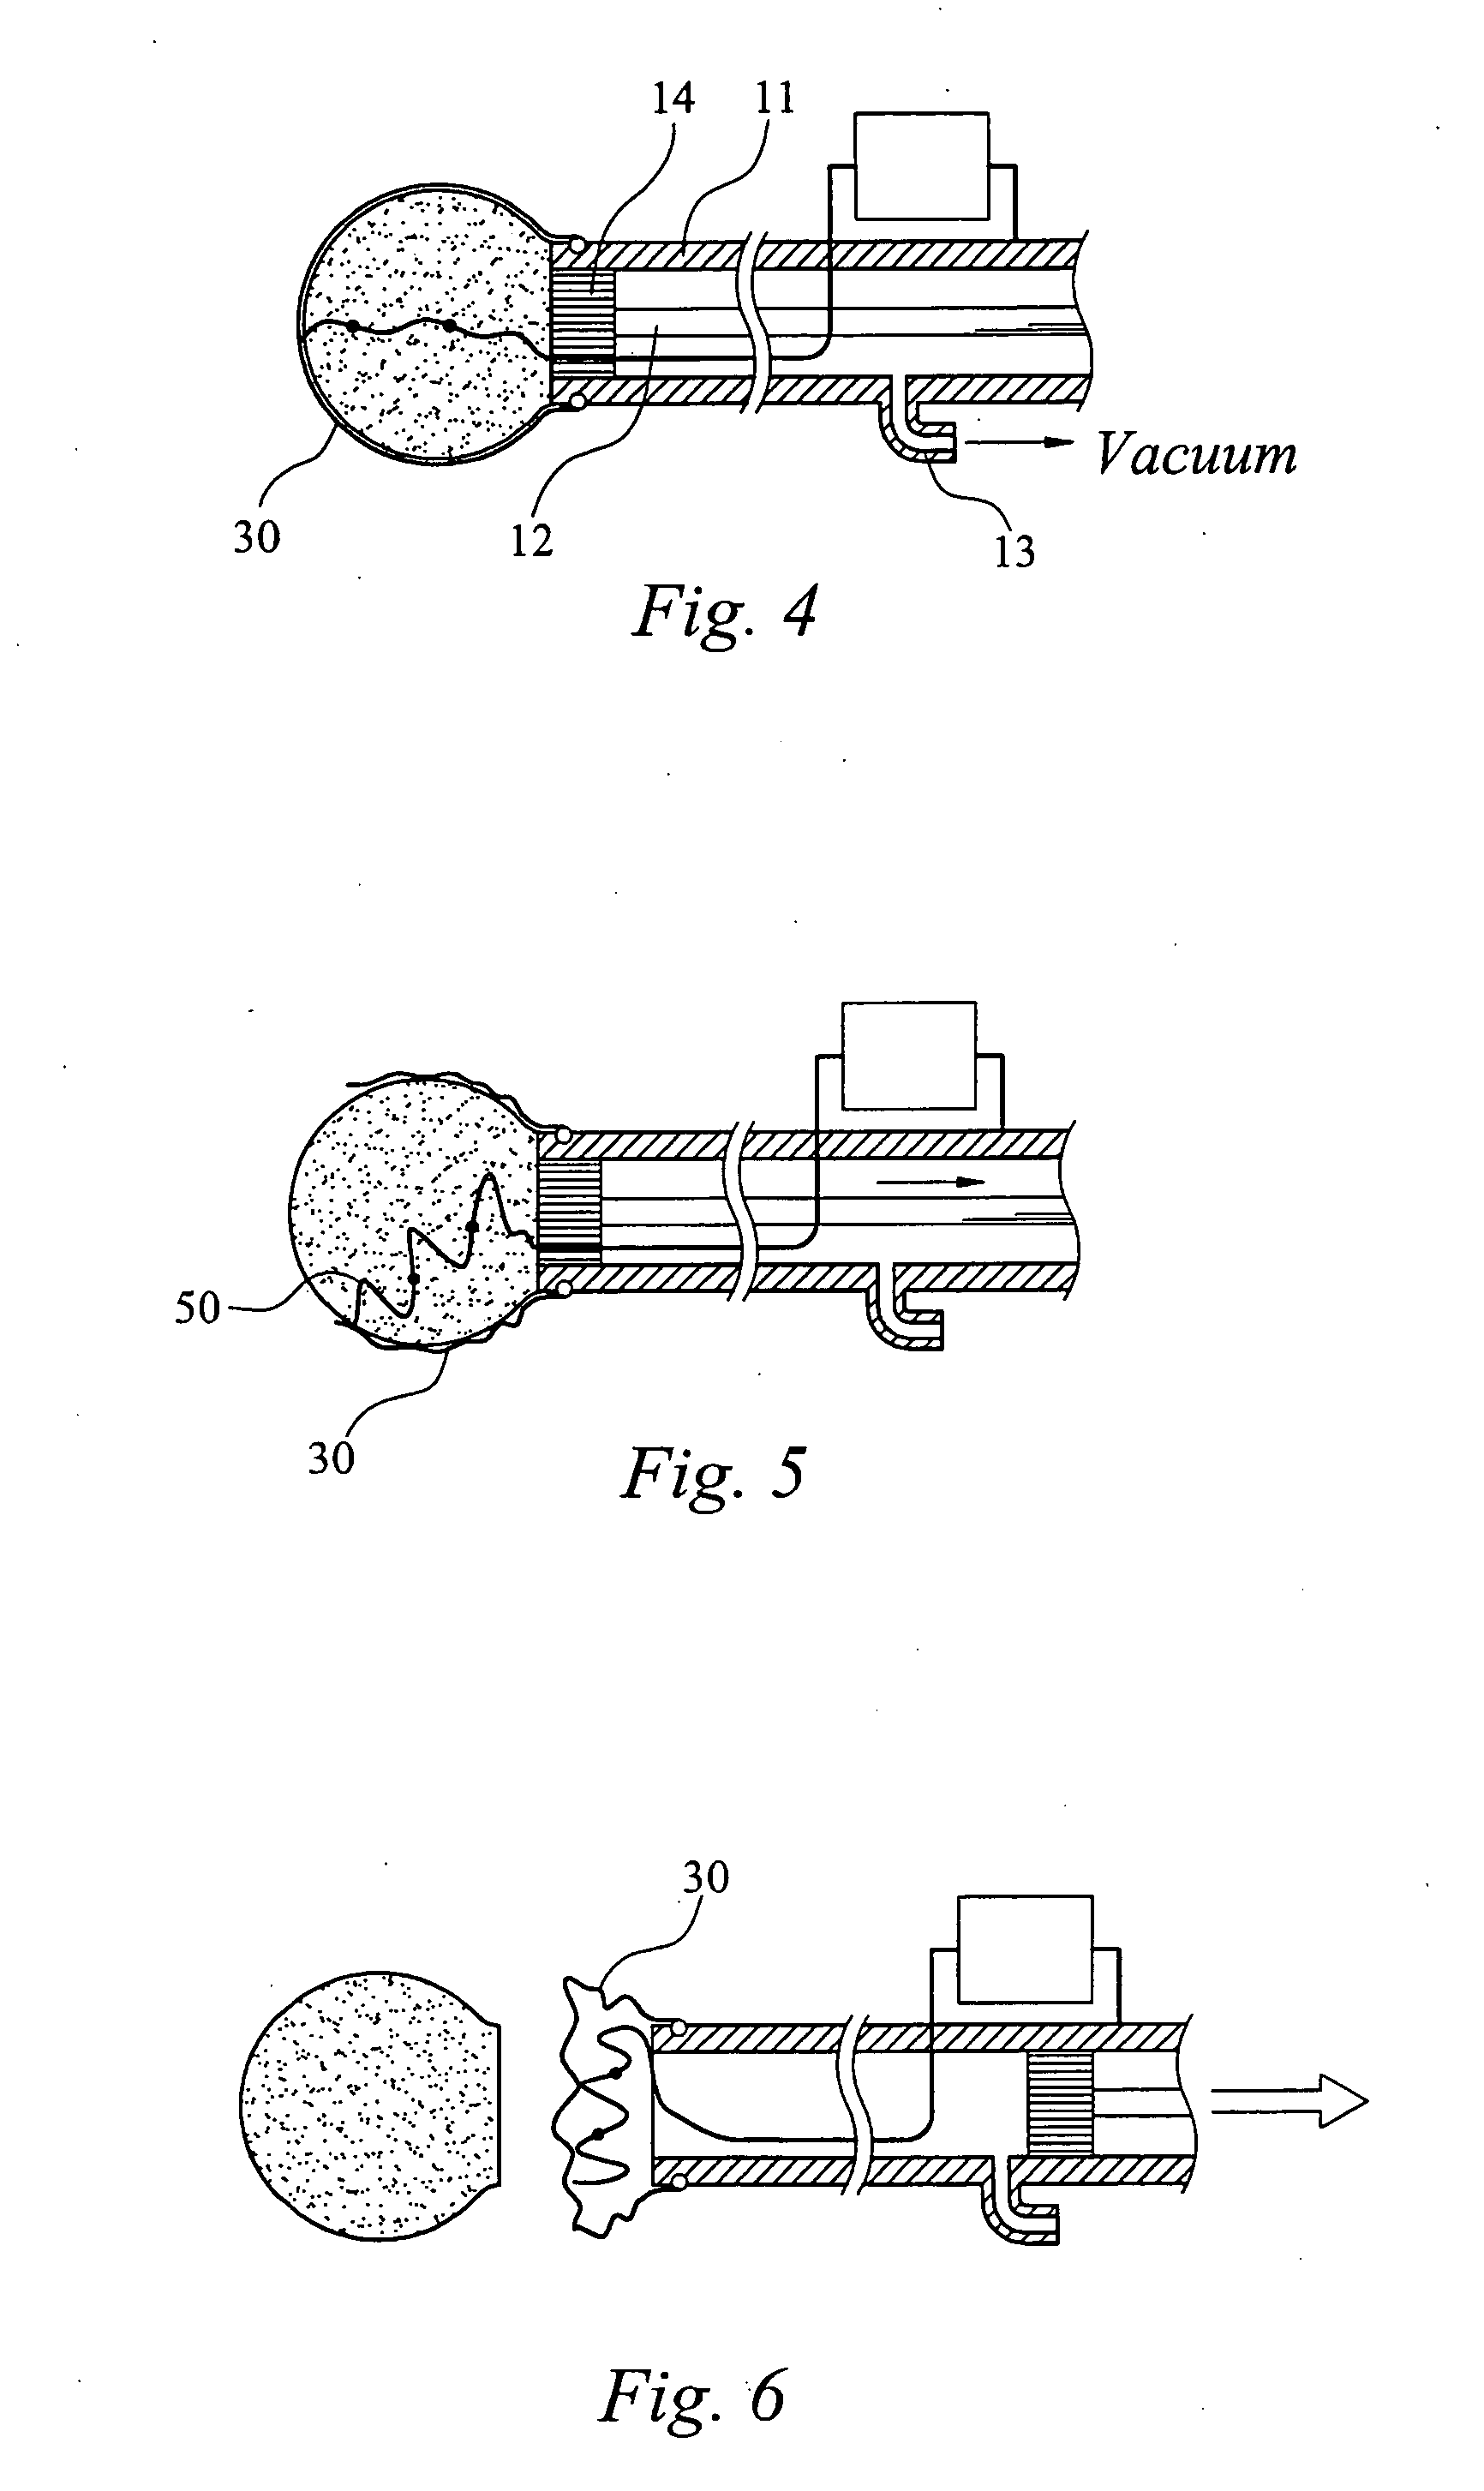 Device for forming a hardened cement in a bone cavity